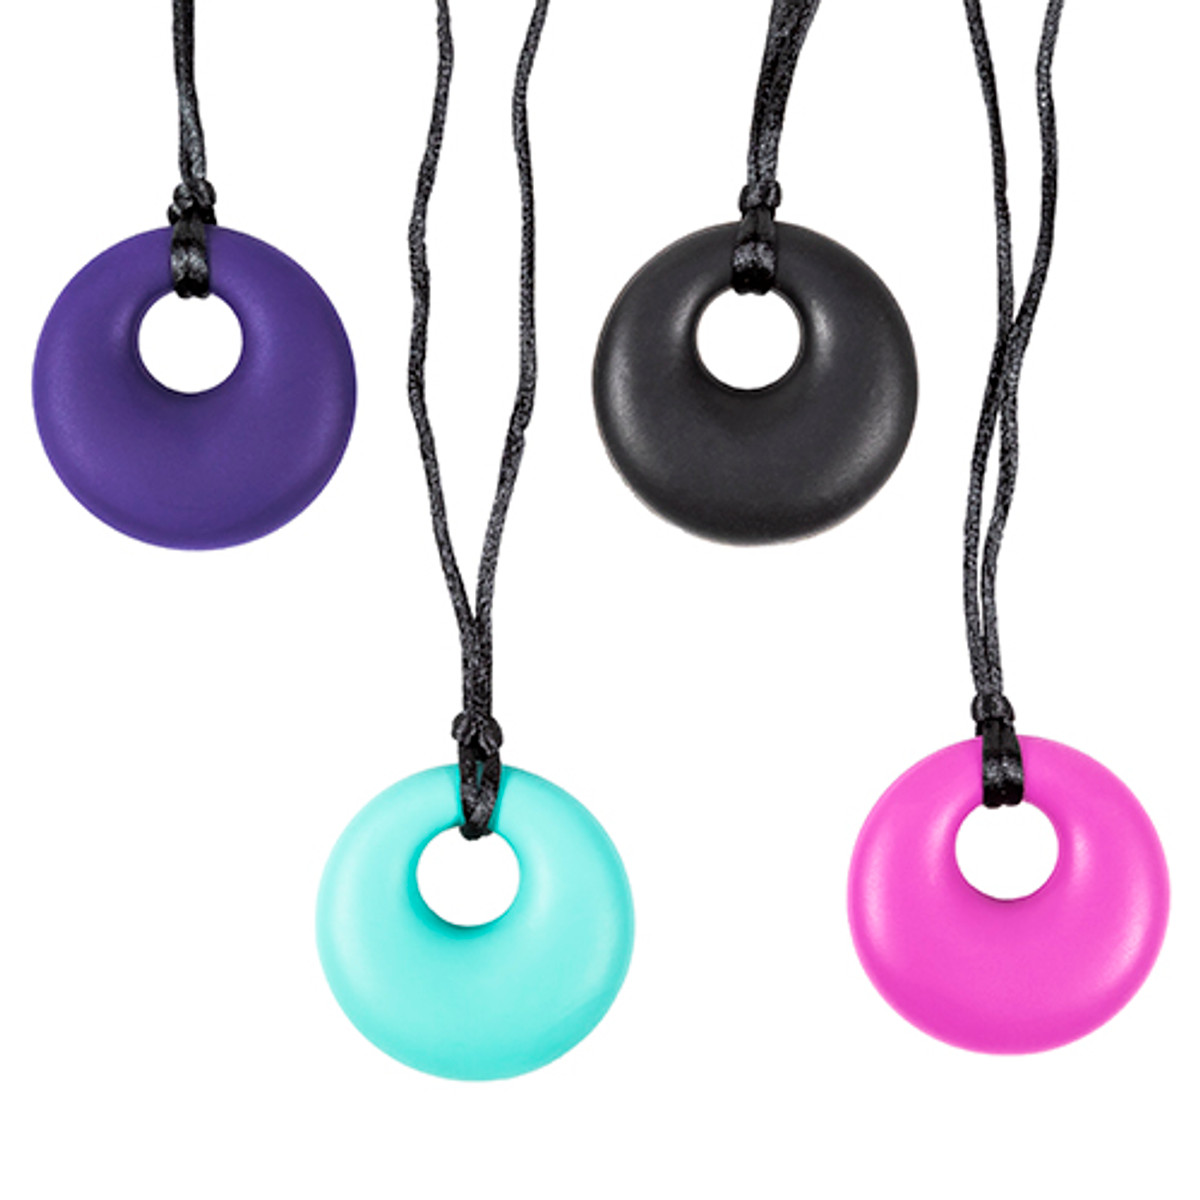 Gafly Chew Necklaces for Sensory Kids Integration with Autism and ADHD | 3  Pack with Extra Cord and Clasp in Assorted Colors